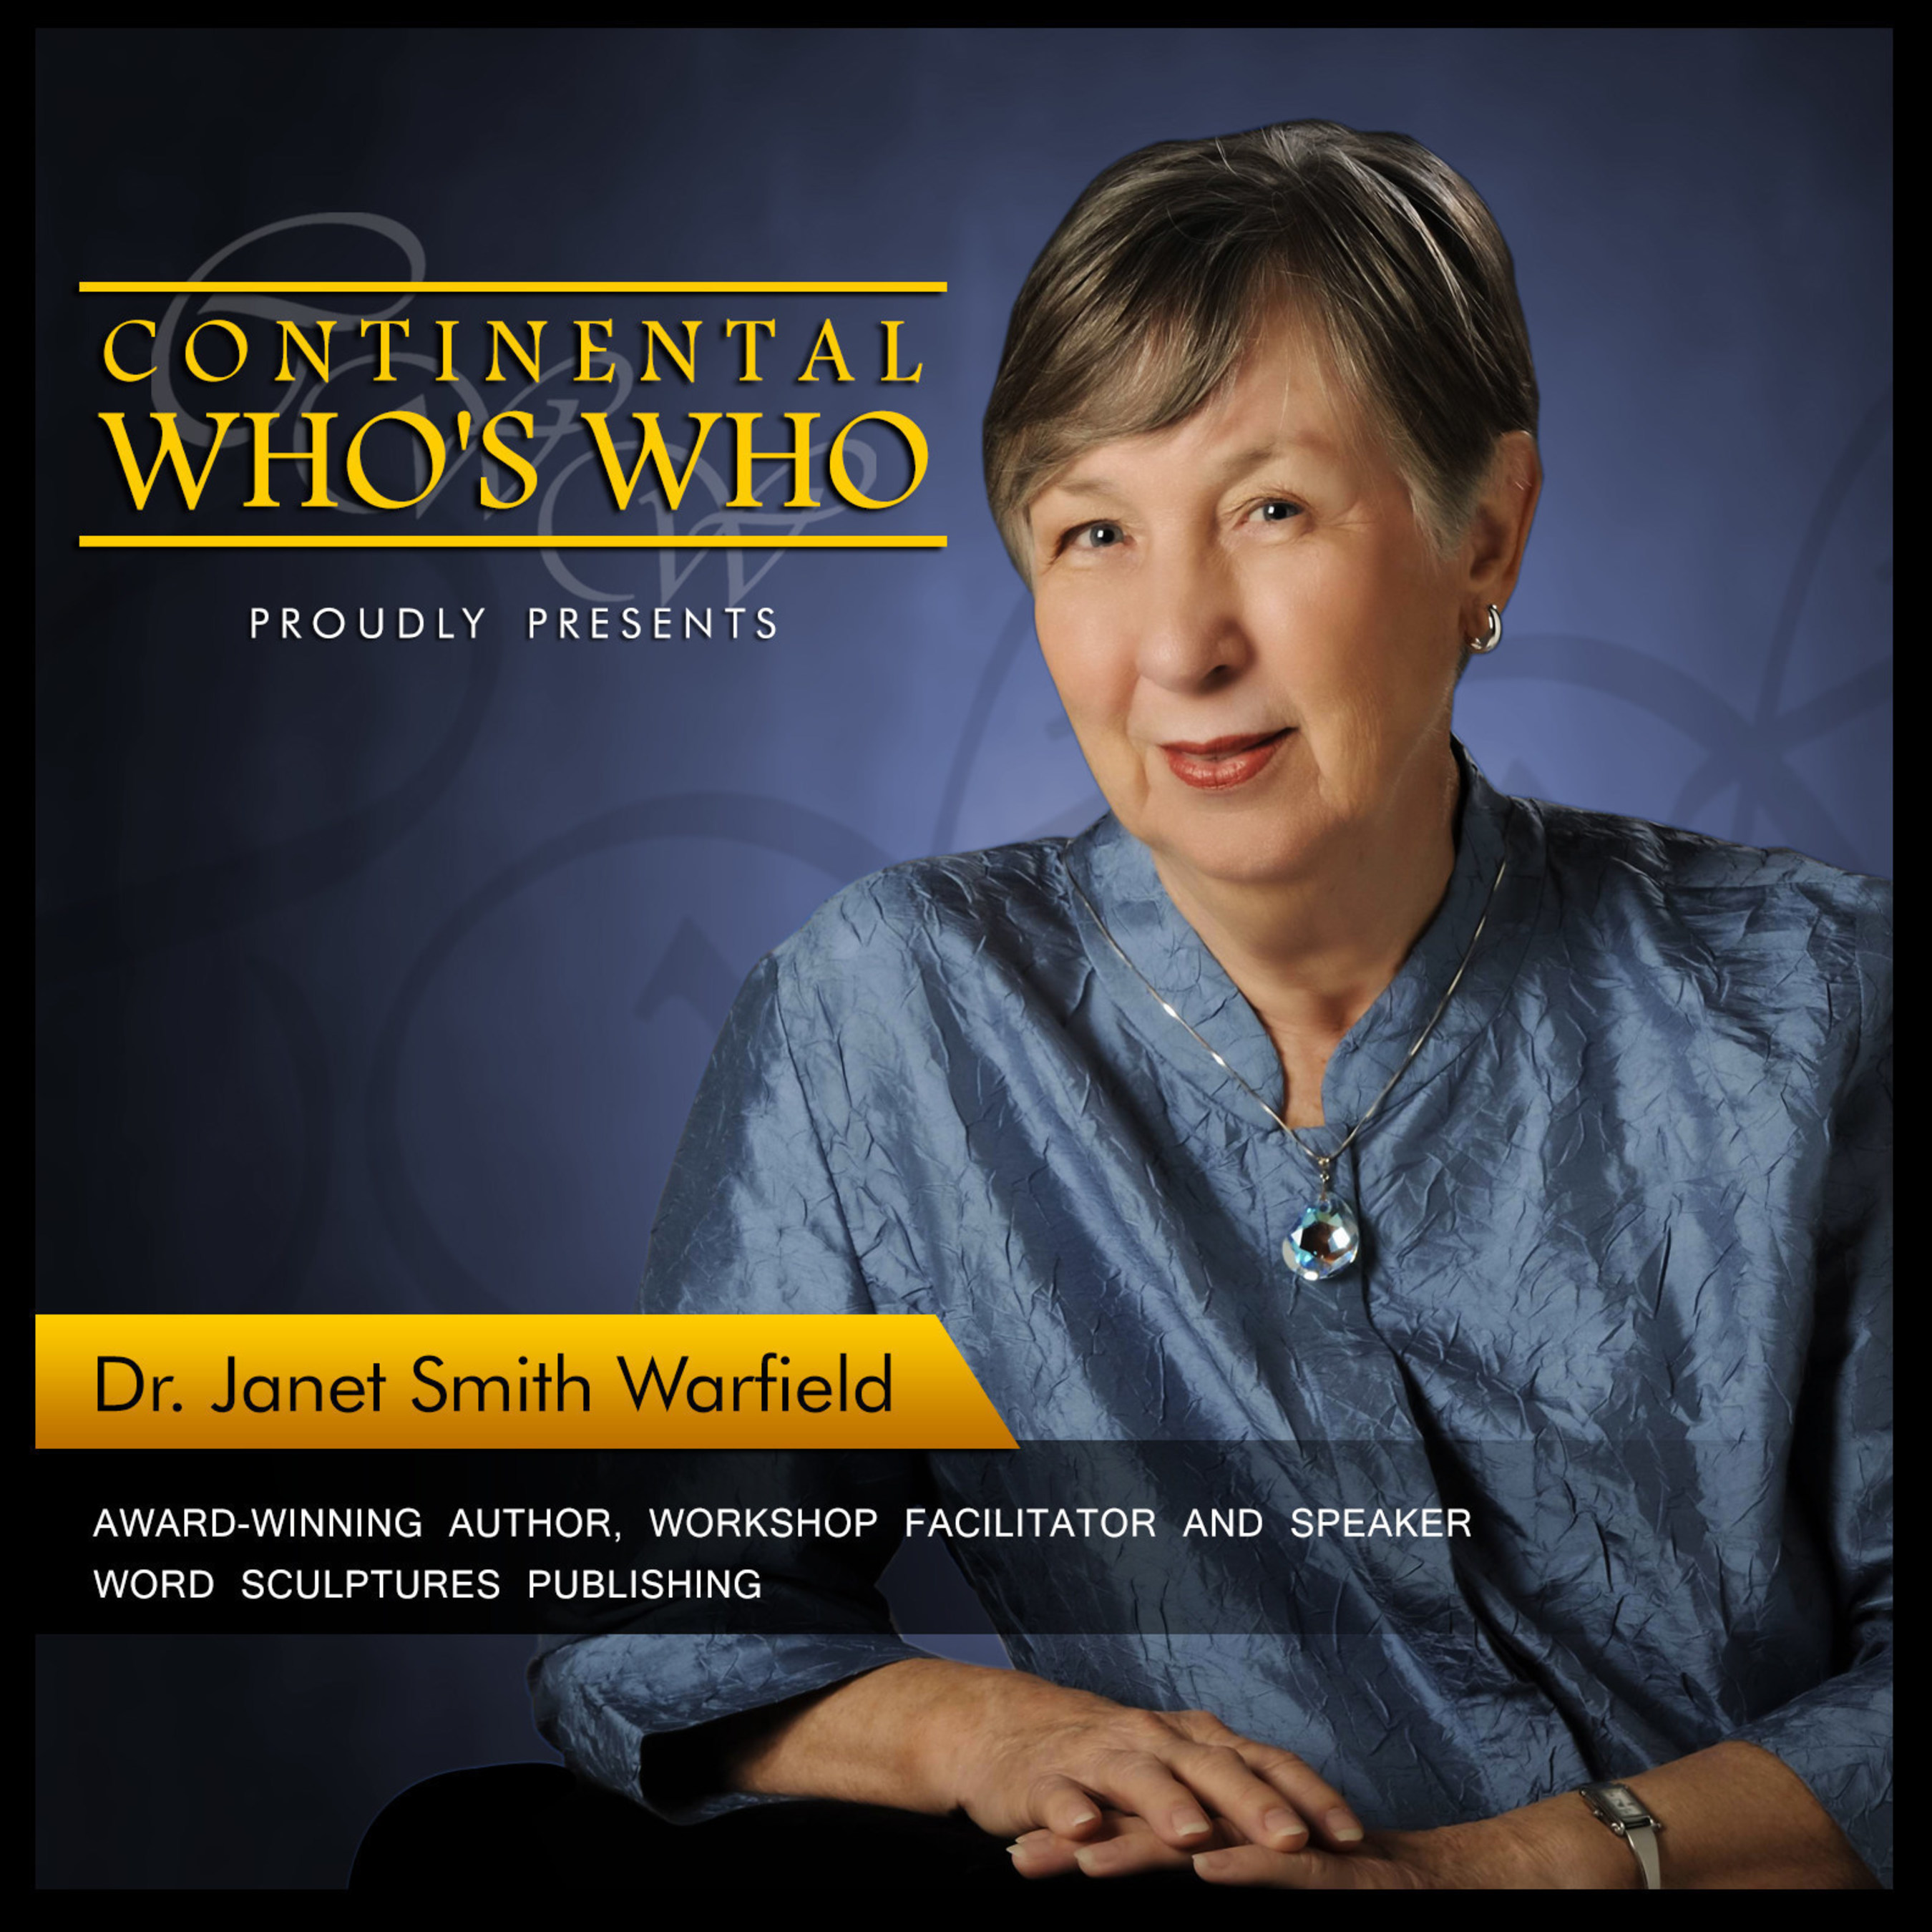 Dr. Janet Smith Warfield is recognized by Continental Who's Who as the 2015 Most Prominent Professional in the field of Consciousness Education.